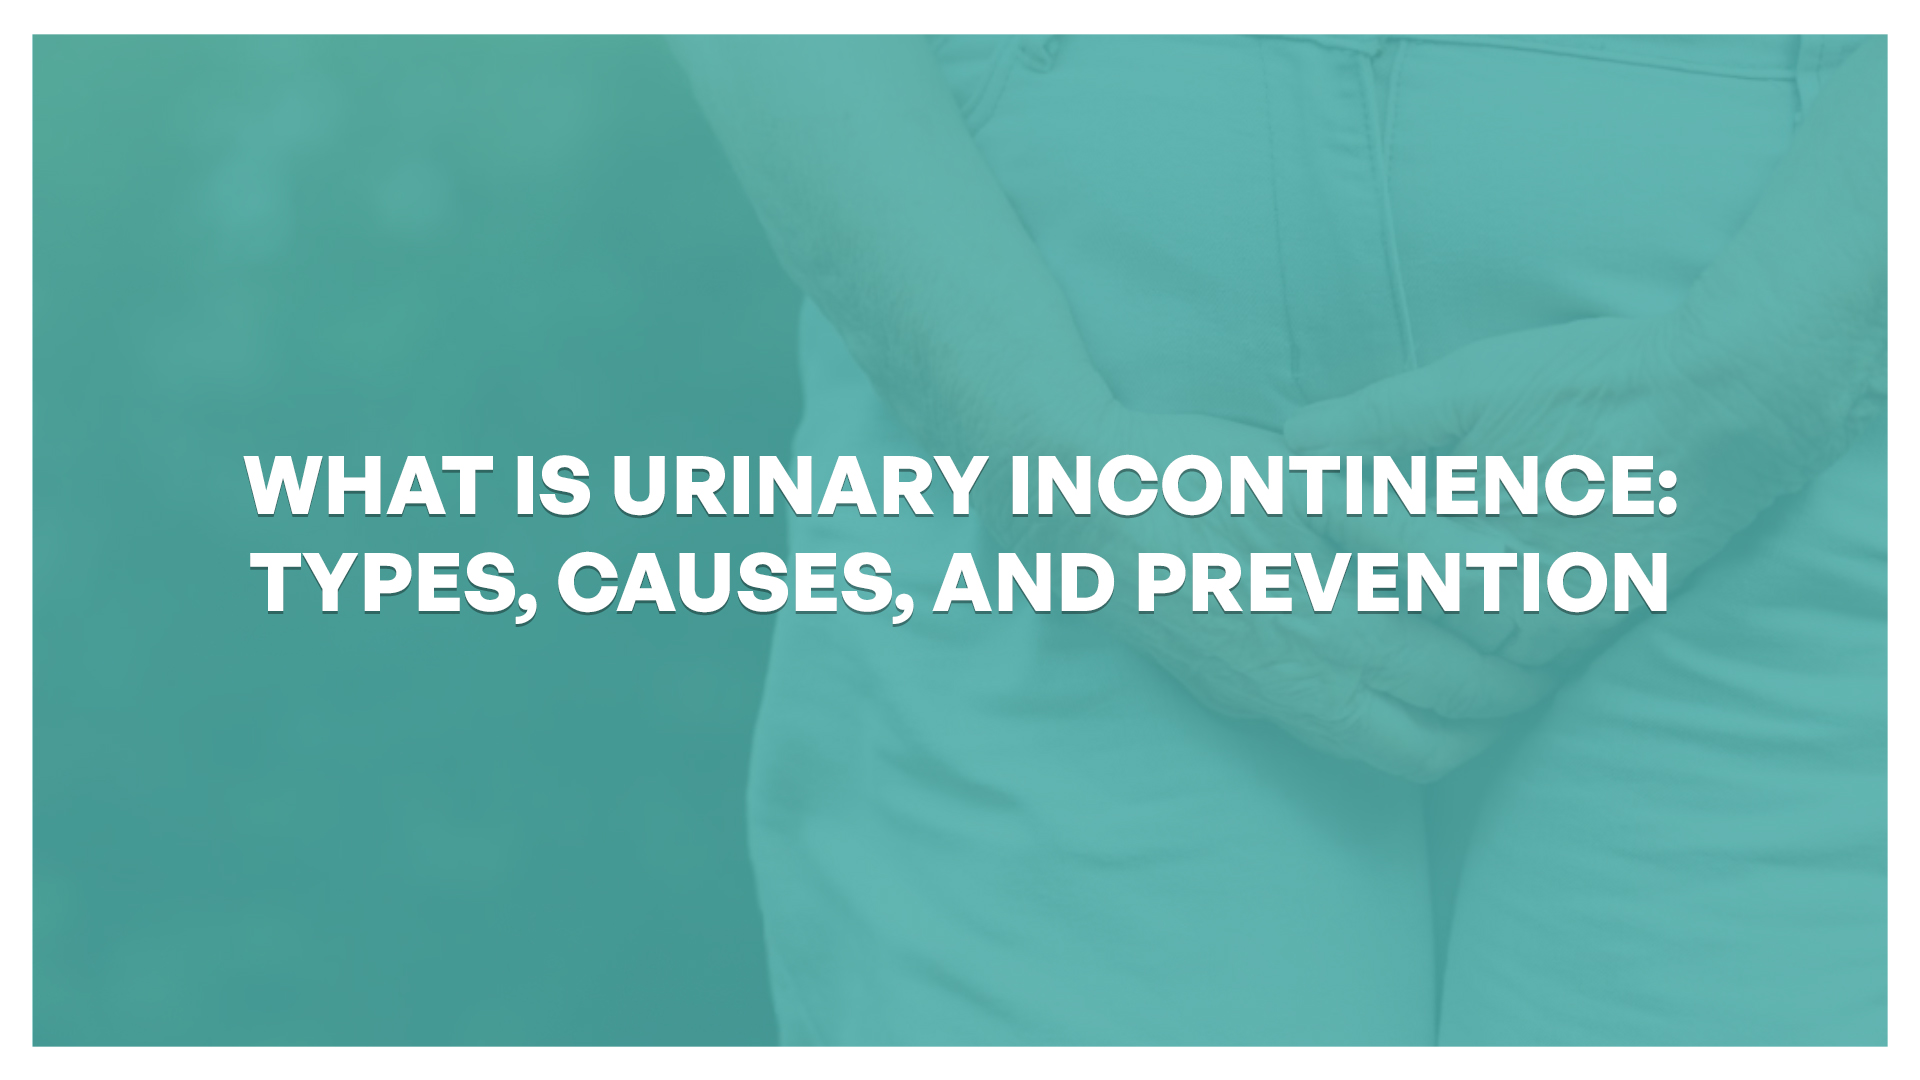 Solutions for urinary incontinence while sneezing and coughing